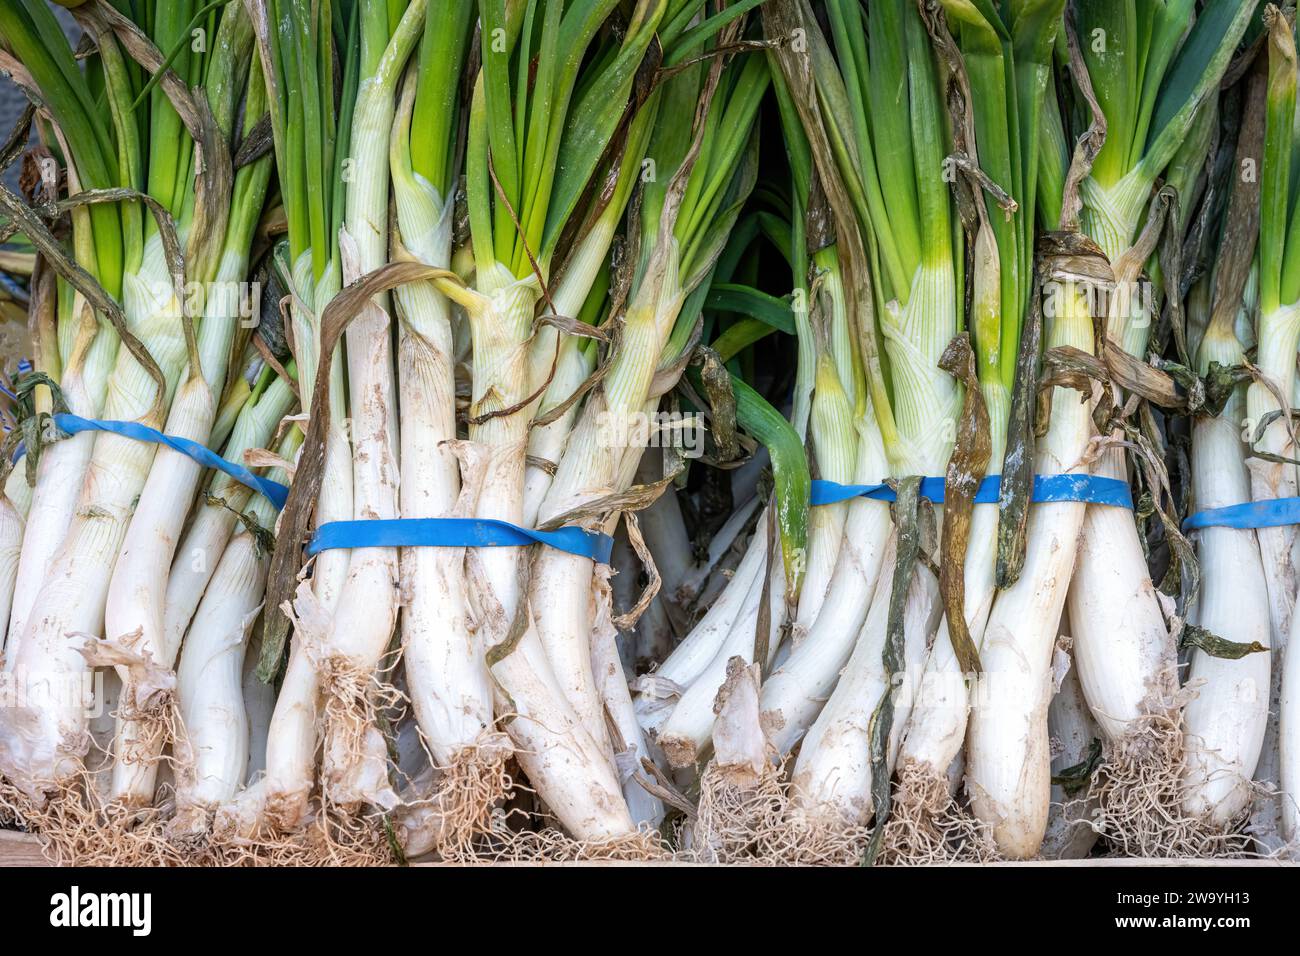 Fresh scallions for sale at a market Stock Photo